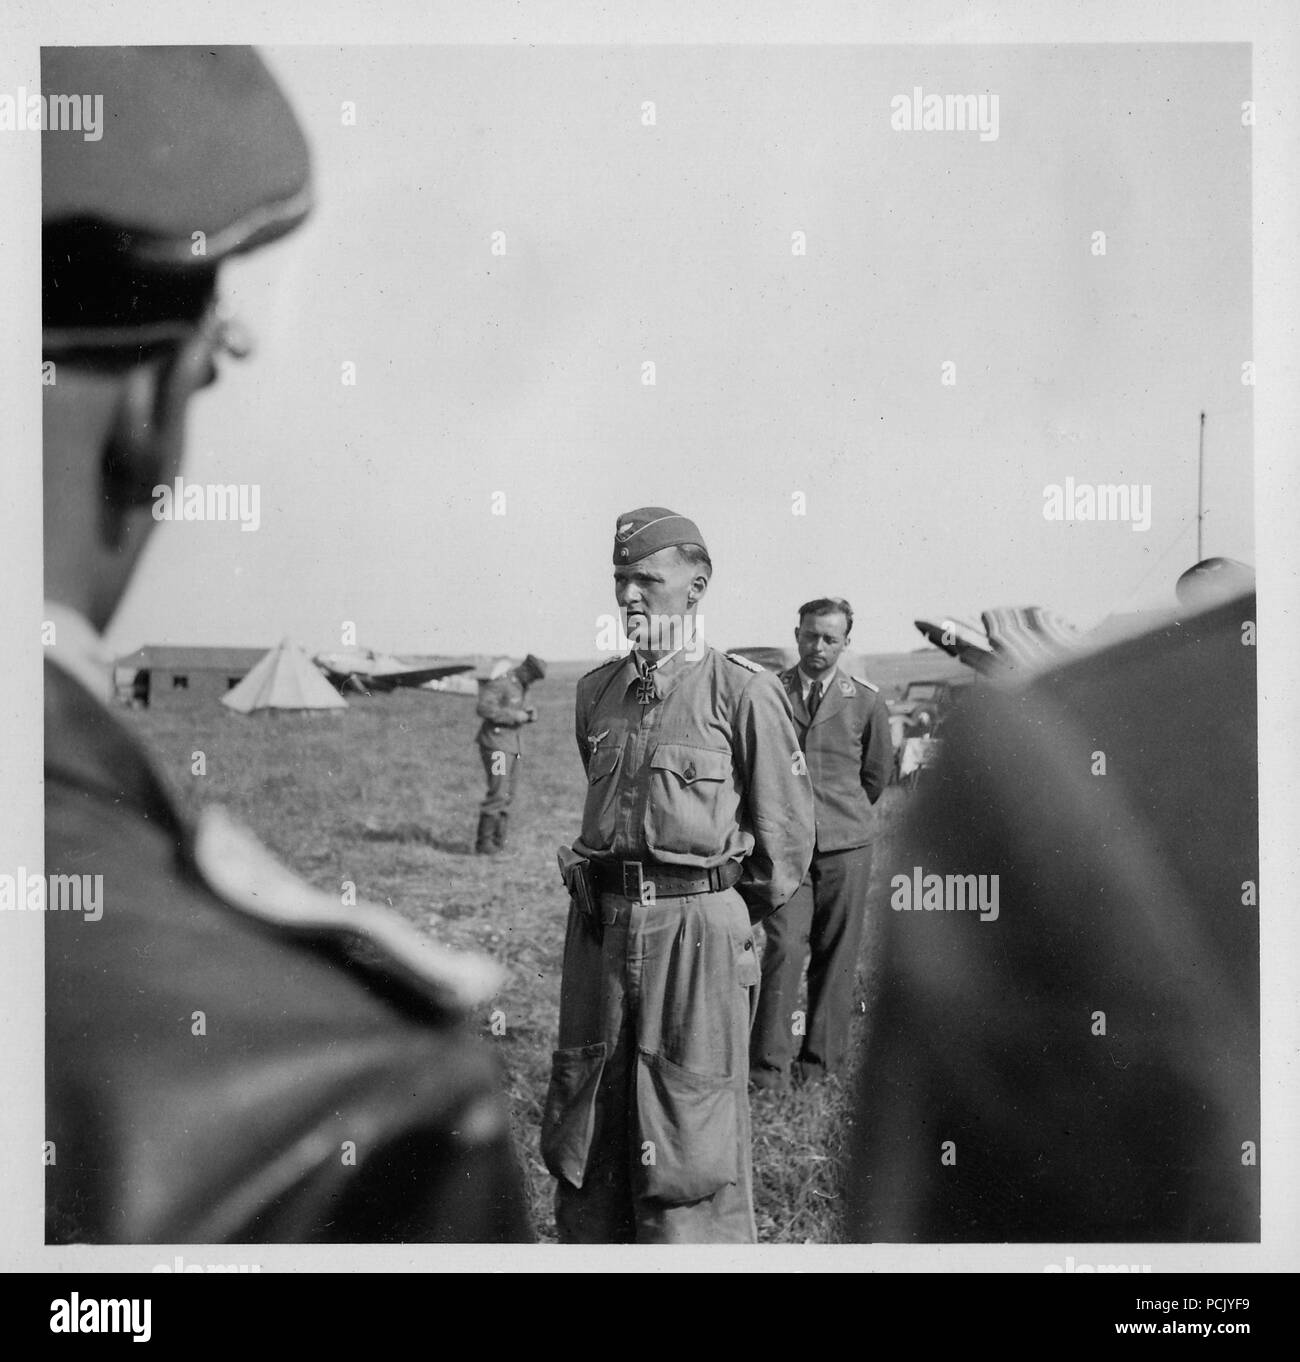 Image from a photo album relating to II. Gruppe, Jagdgeschwader 3: The Geschwaderkommodore of JG3 from 21st August 1940 to 11th August 1942, Major Günter Lützow (centre and facing the camera), talks to his officers early in Operation Barbarossa. Lützow wears the Knight's Cross of the Iron Cross that he was awarded on 18th September 1940. Stock Photo